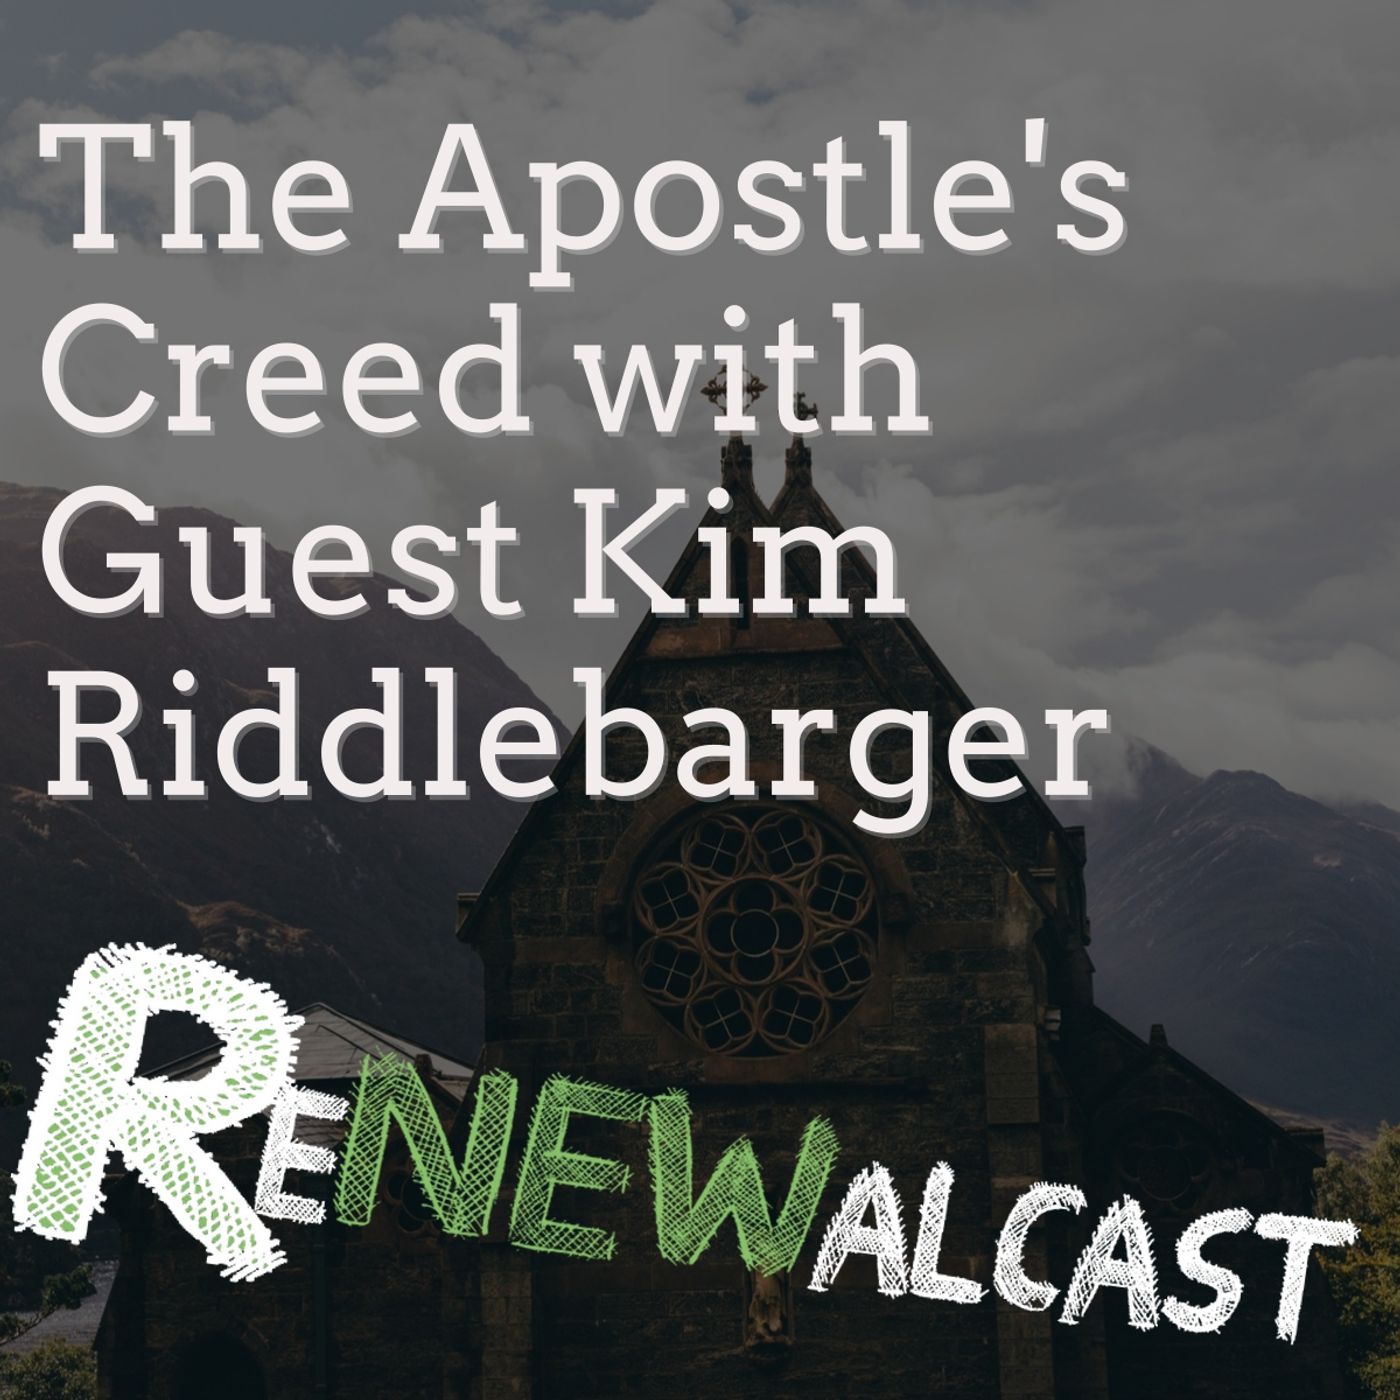 The Apostle’s Creed with Guest Kim Riddlebarger